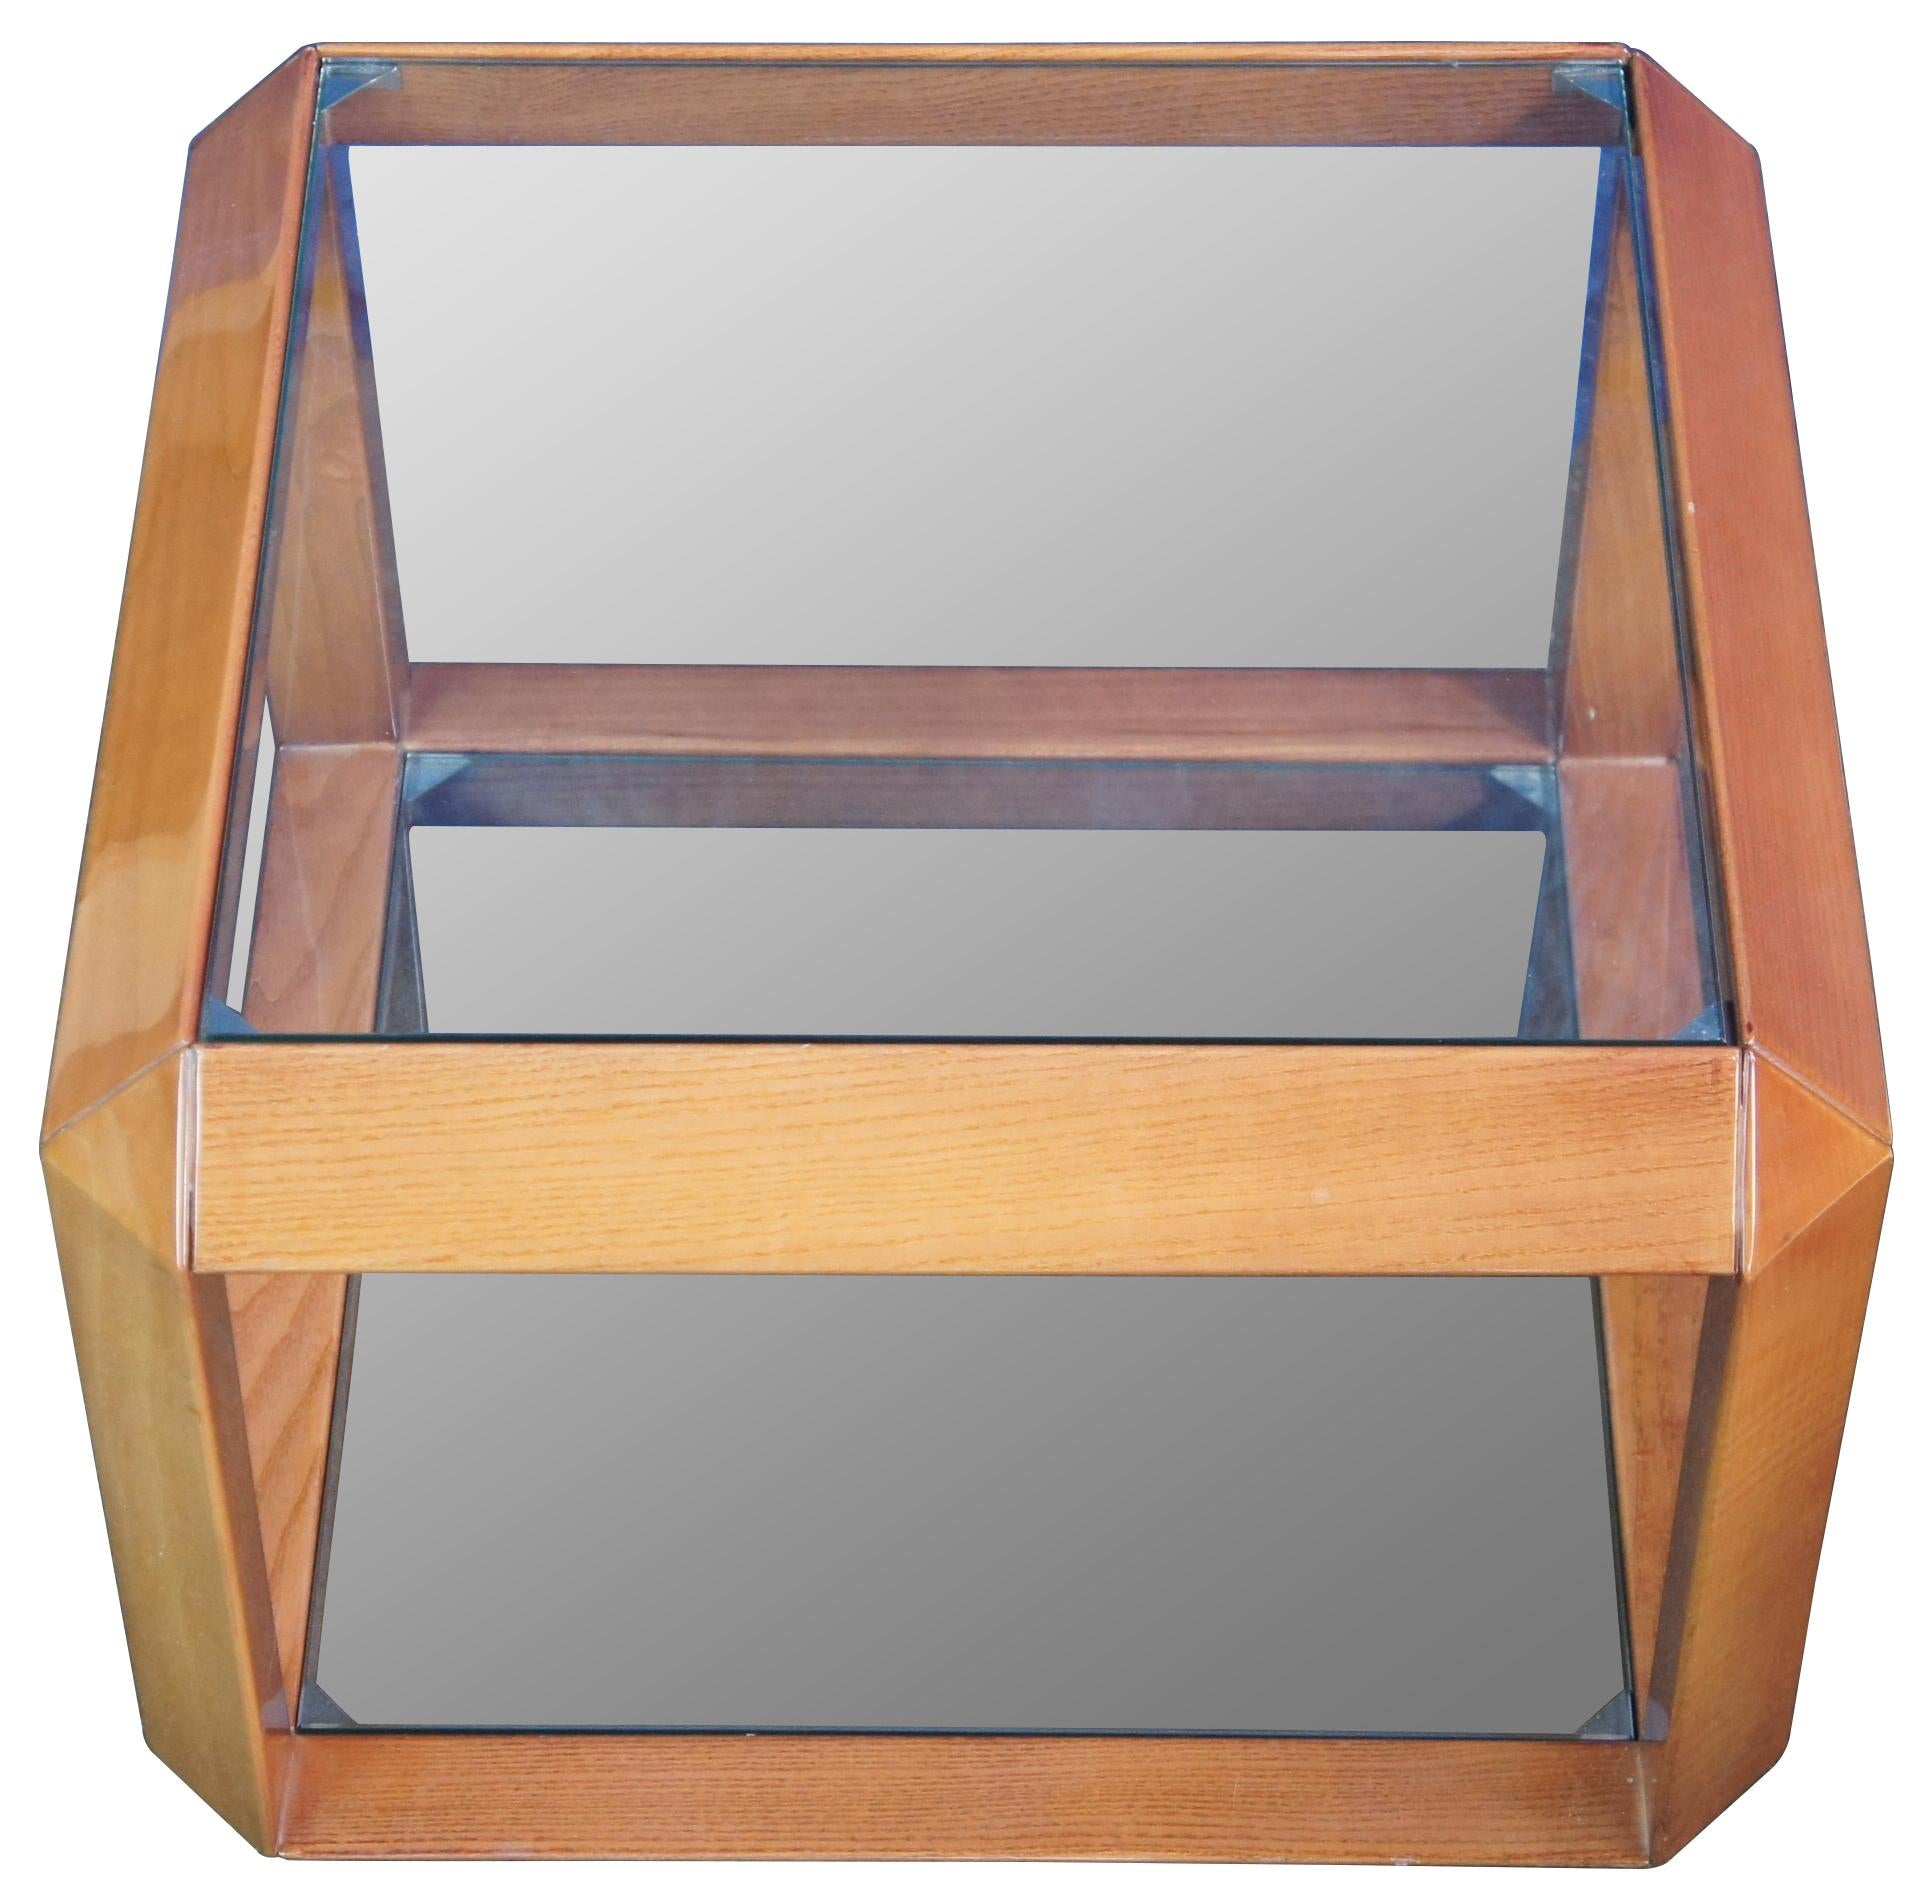 Circa 1970s high gloss cube table. Made from wood with two glass shelves.

Provenance: Jerome Schottenstein Estate, Columbus Ohio. Jerome was an American entrepreneur and philanthropist, co-founder of Schottenstein Stores Corp. The Schottenstein